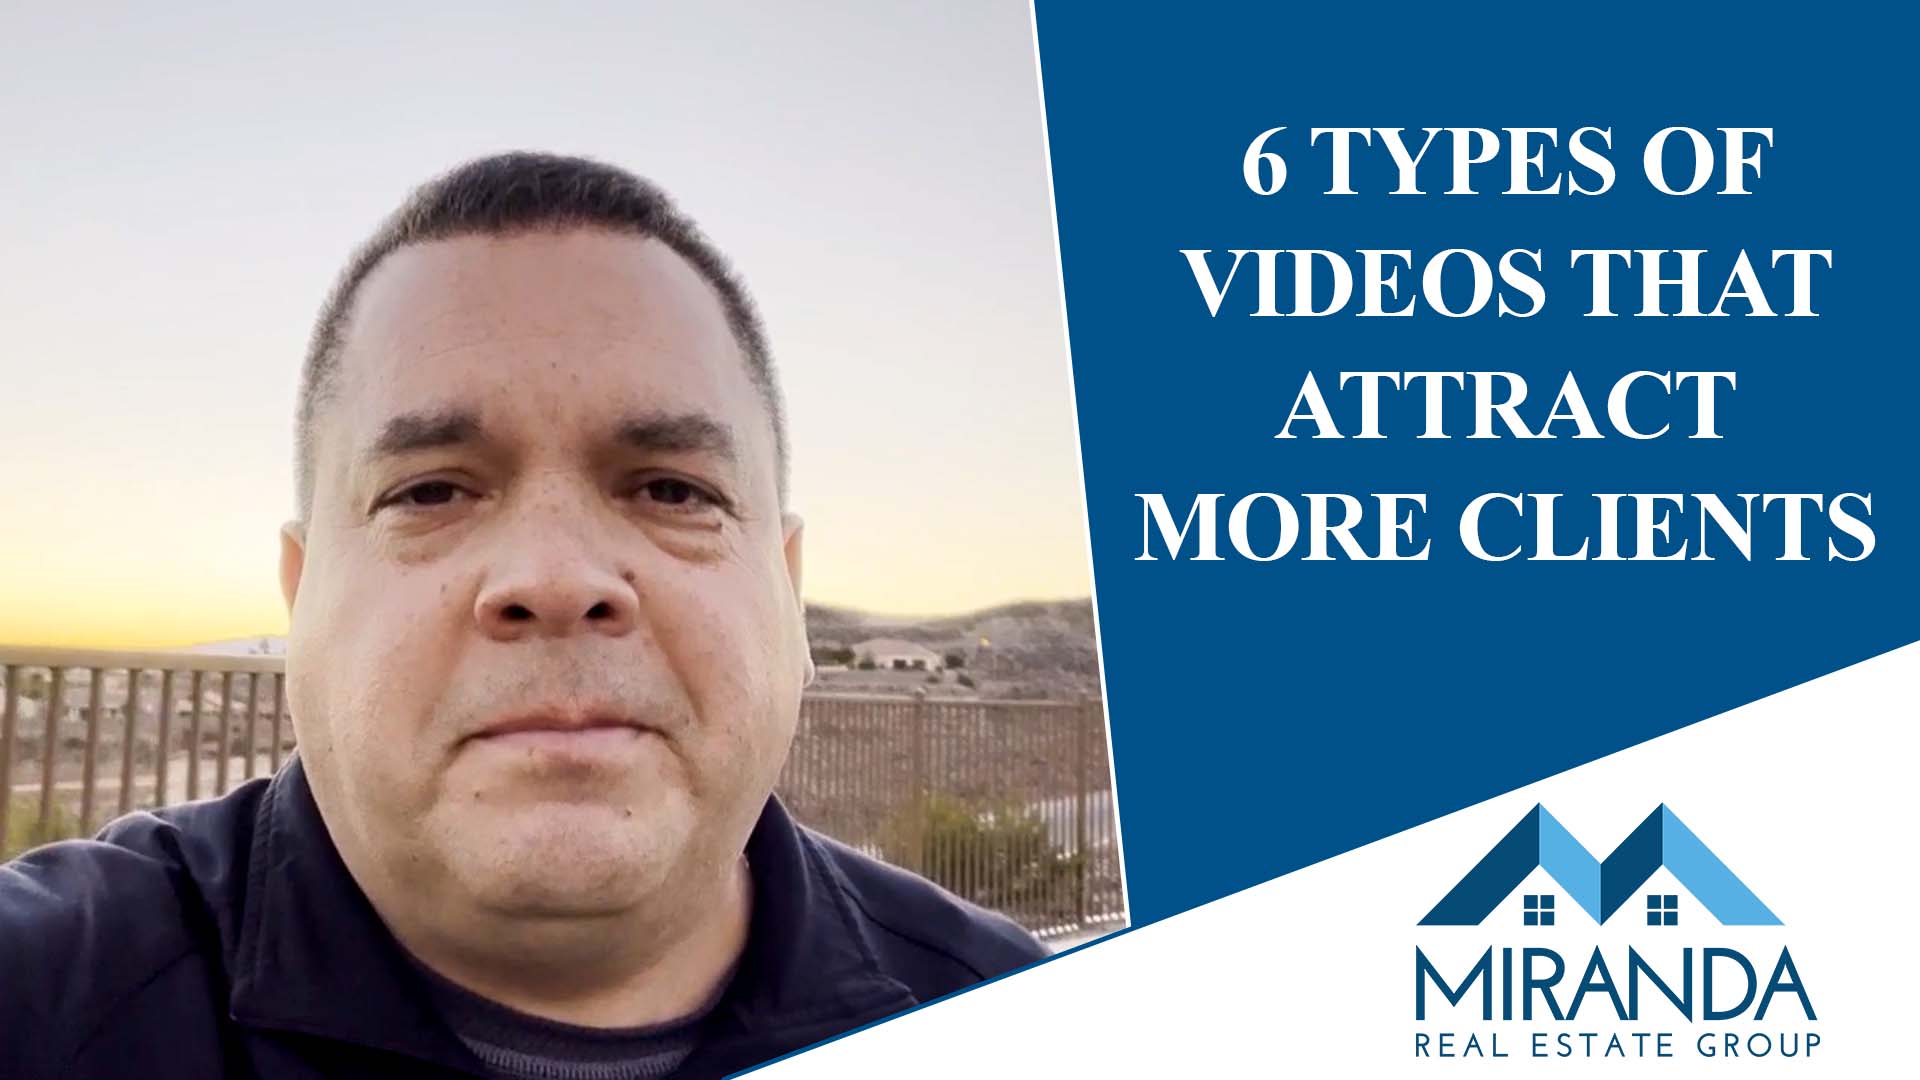 The Types of Videos That Will Attract More Clients